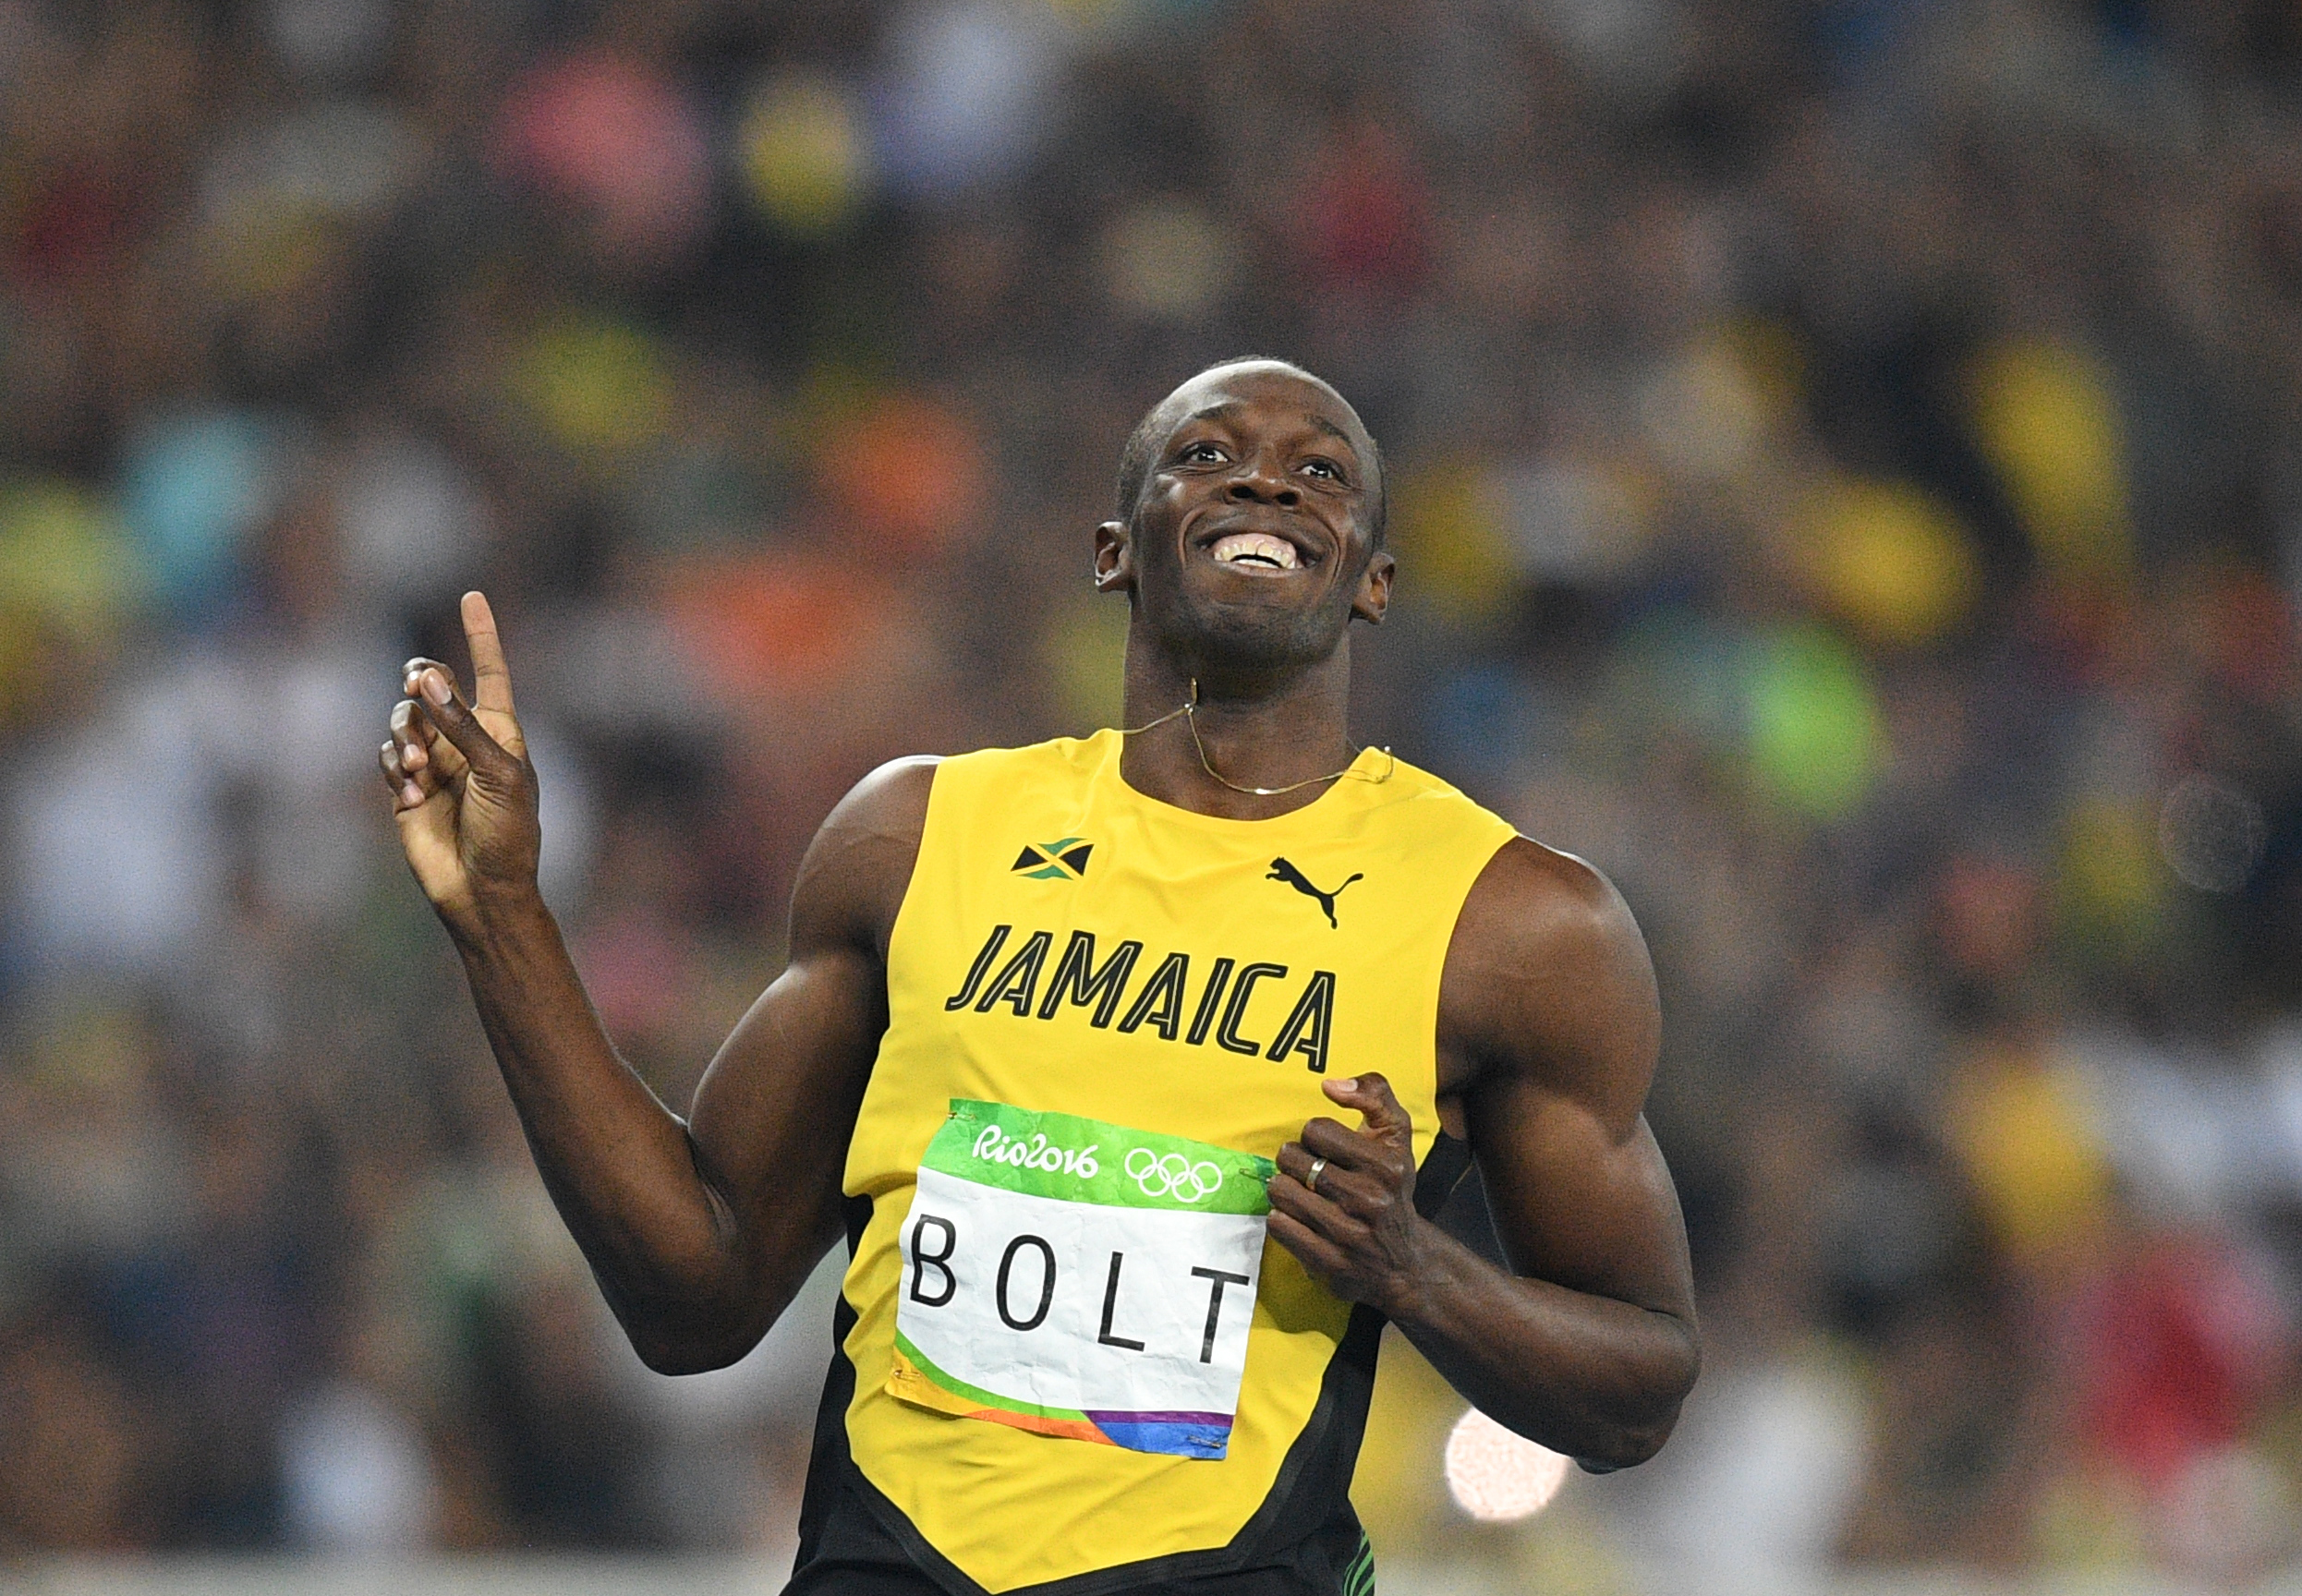 Jamaica's Usain Bolt reacts after winning his Men's 200m Semifinal during the athletics event at the Rio 2016 Olympic Games at the Olympic Stadium in Rio de Janeiro on August 17, 2016.   / AFP PHOTO / Johannes EISELE